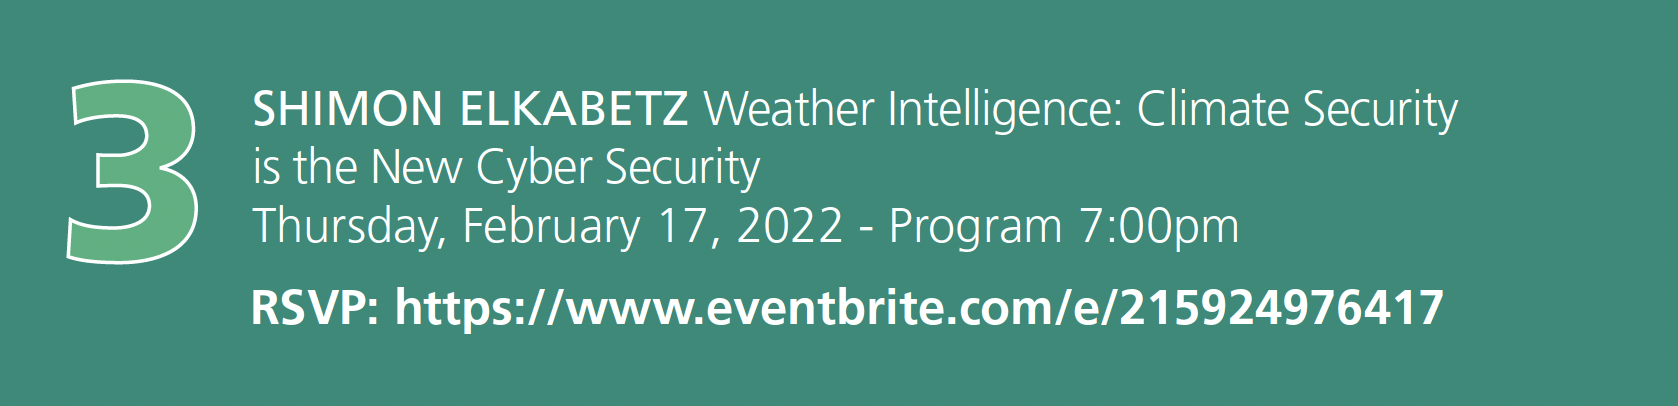 Number 3. Shimon Elkabetz. Weather Intelligence: Climate Security is the New Cyber Security. Thursday, February 17, 2022 - Program 7:00pm RSVP: event registration link embedded in image